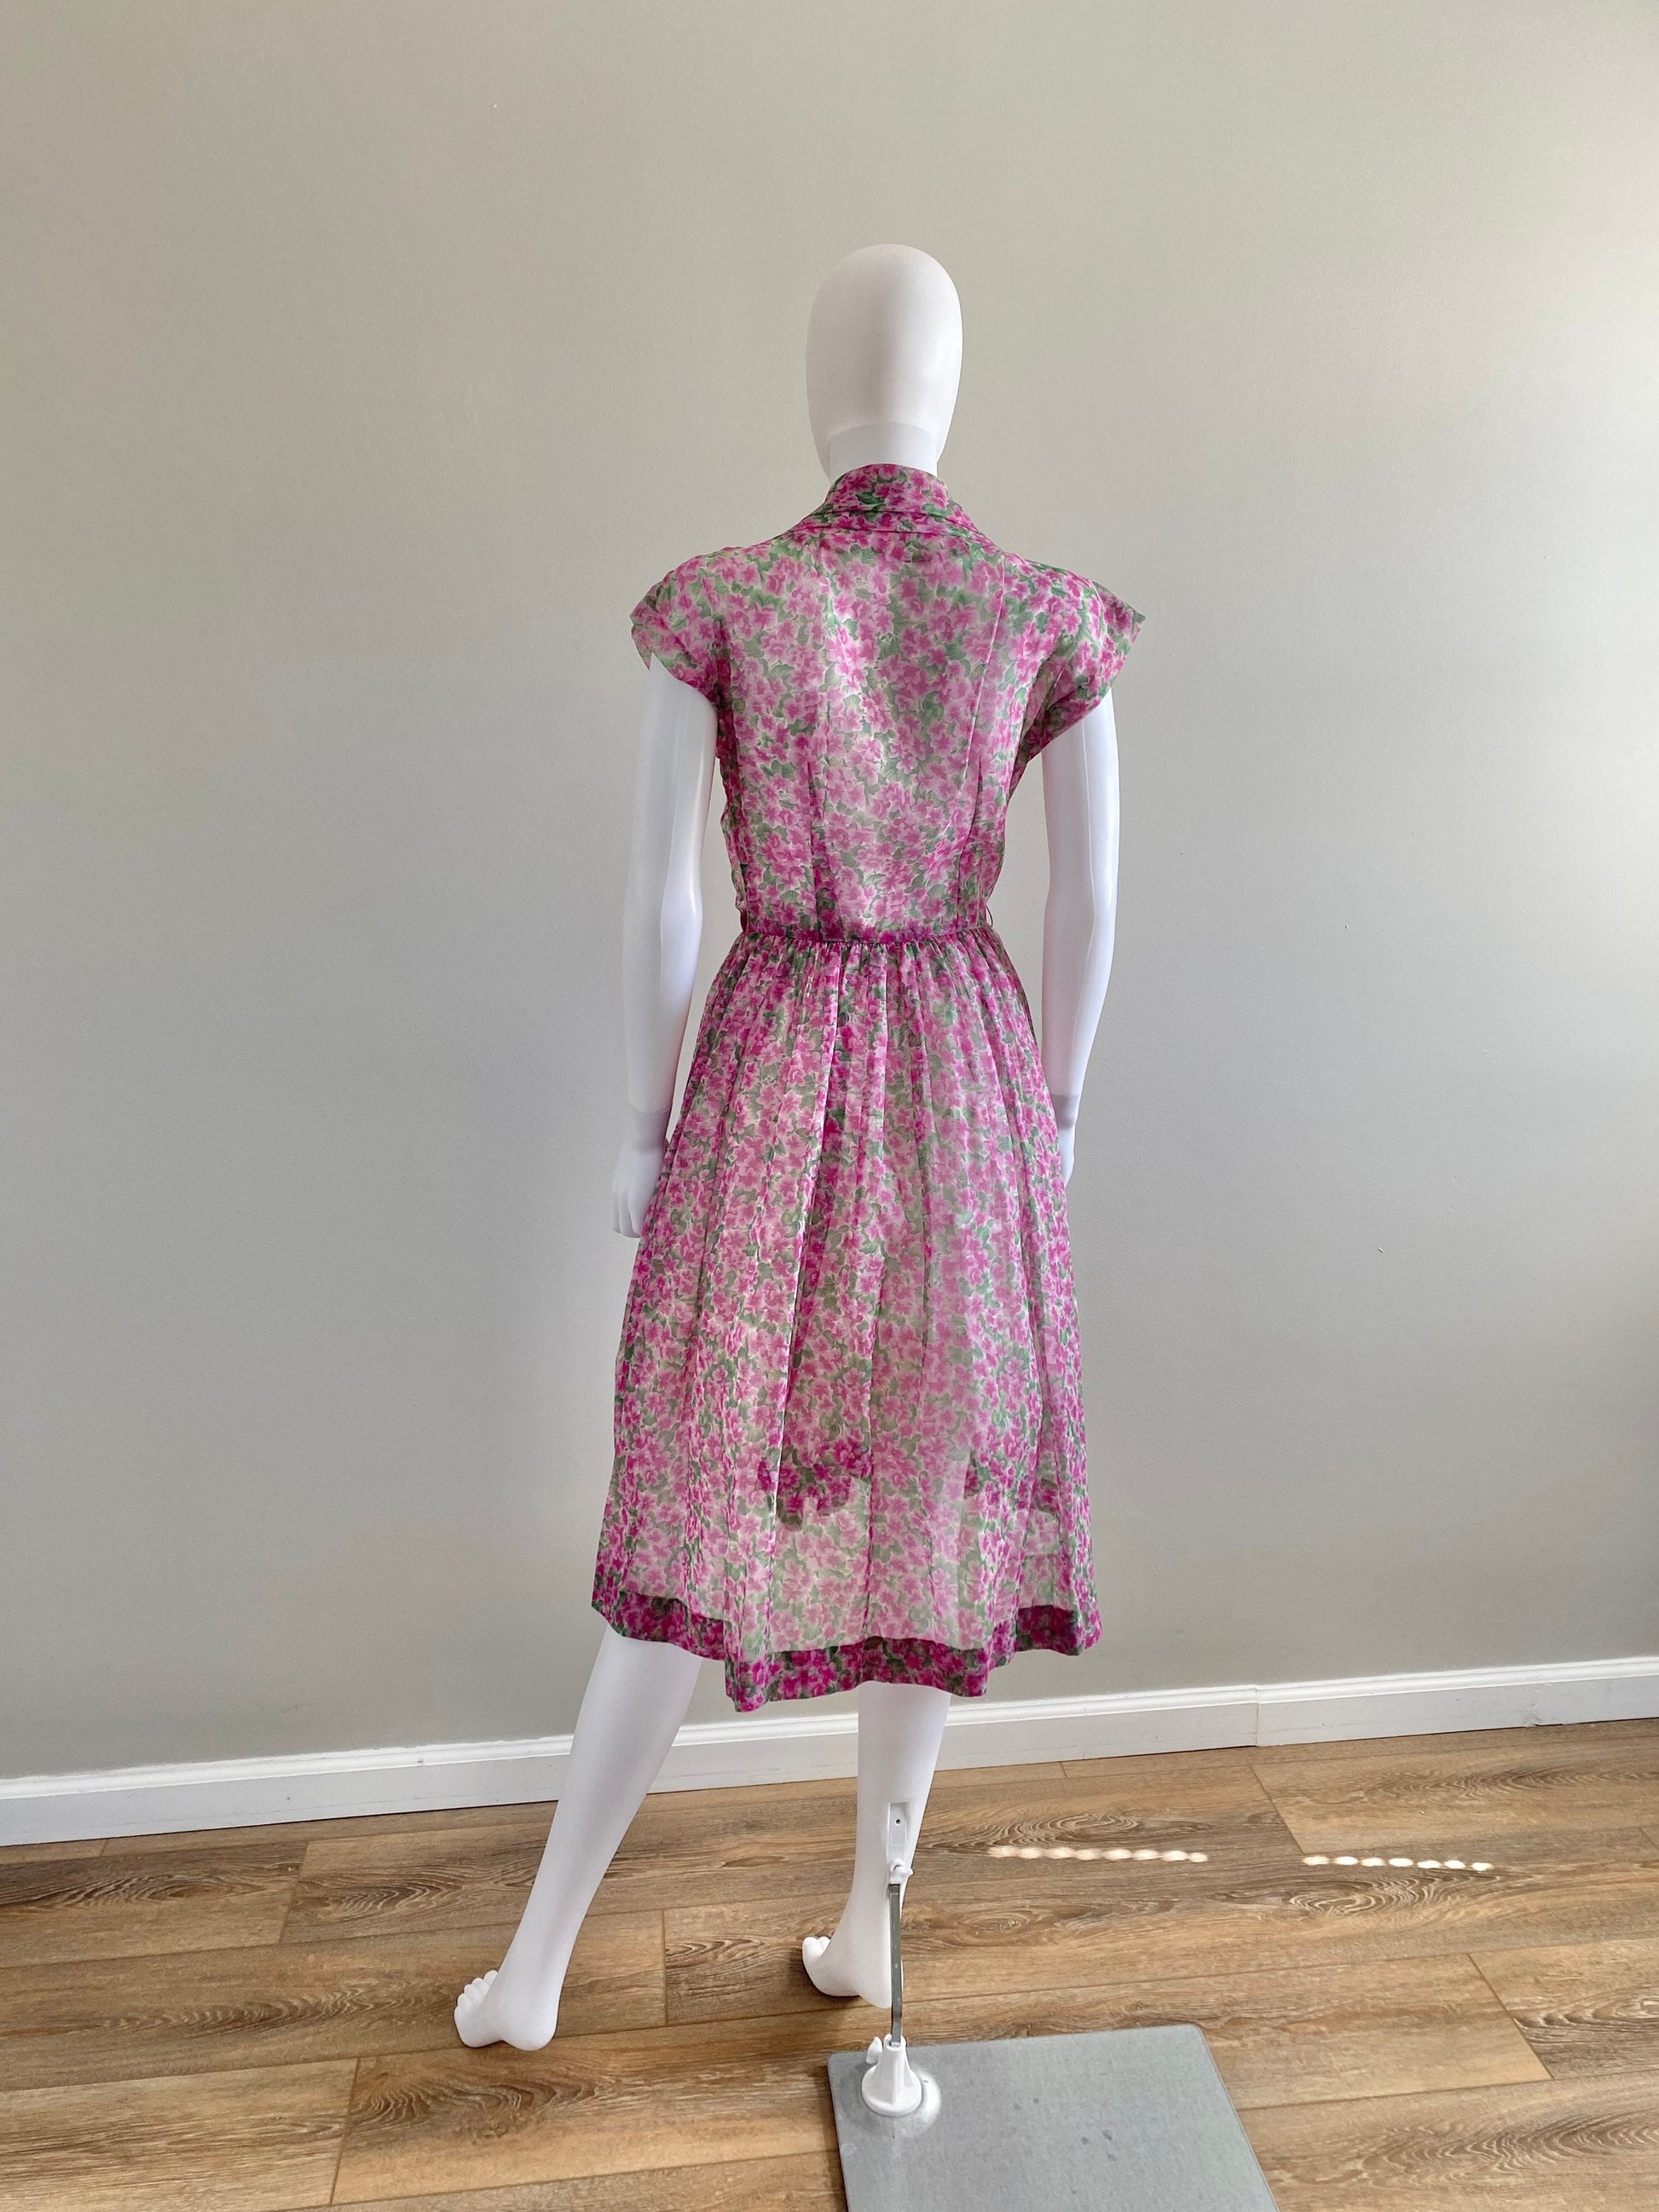 Vintage 1950s Floral Party Dress / 50s retro nylon fit and flare swing dress / Size S